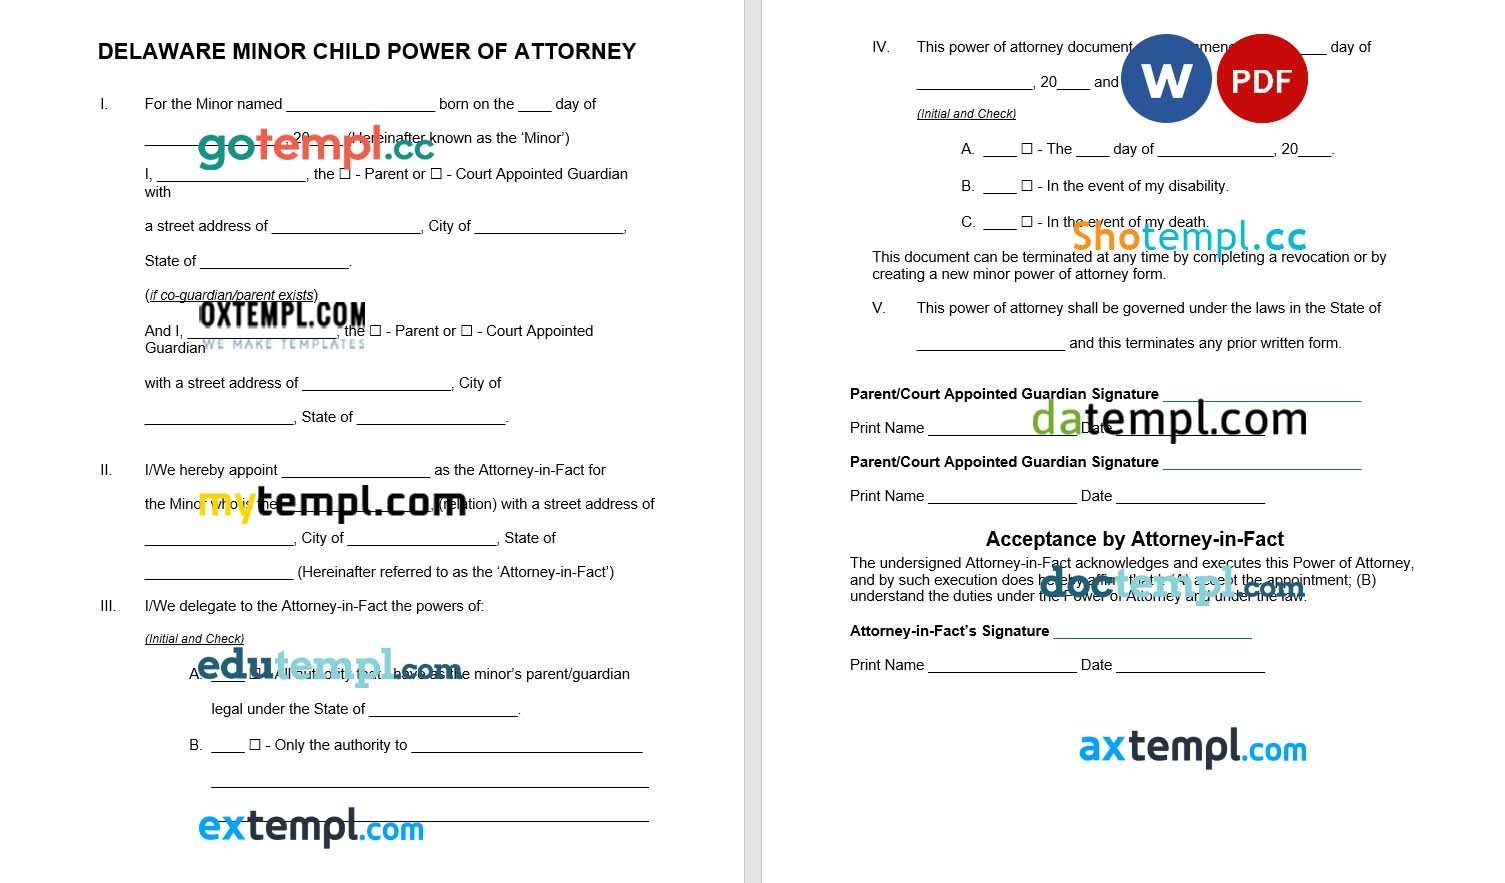 Delaware Minor Child Power of Attorney Form example, fully editable